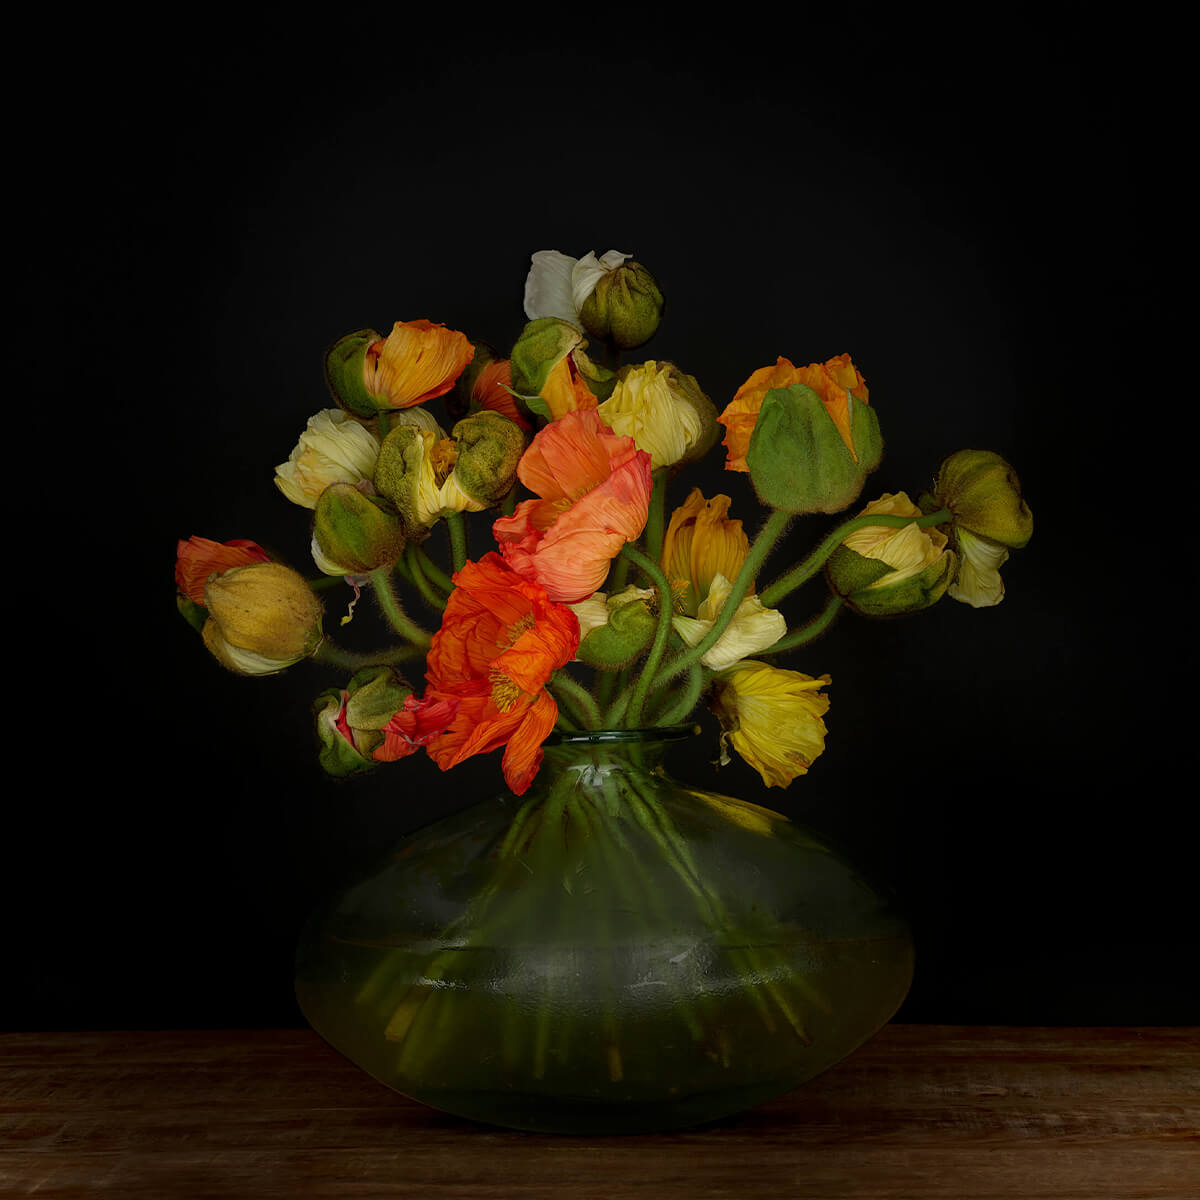 Picturesque vase with flowers